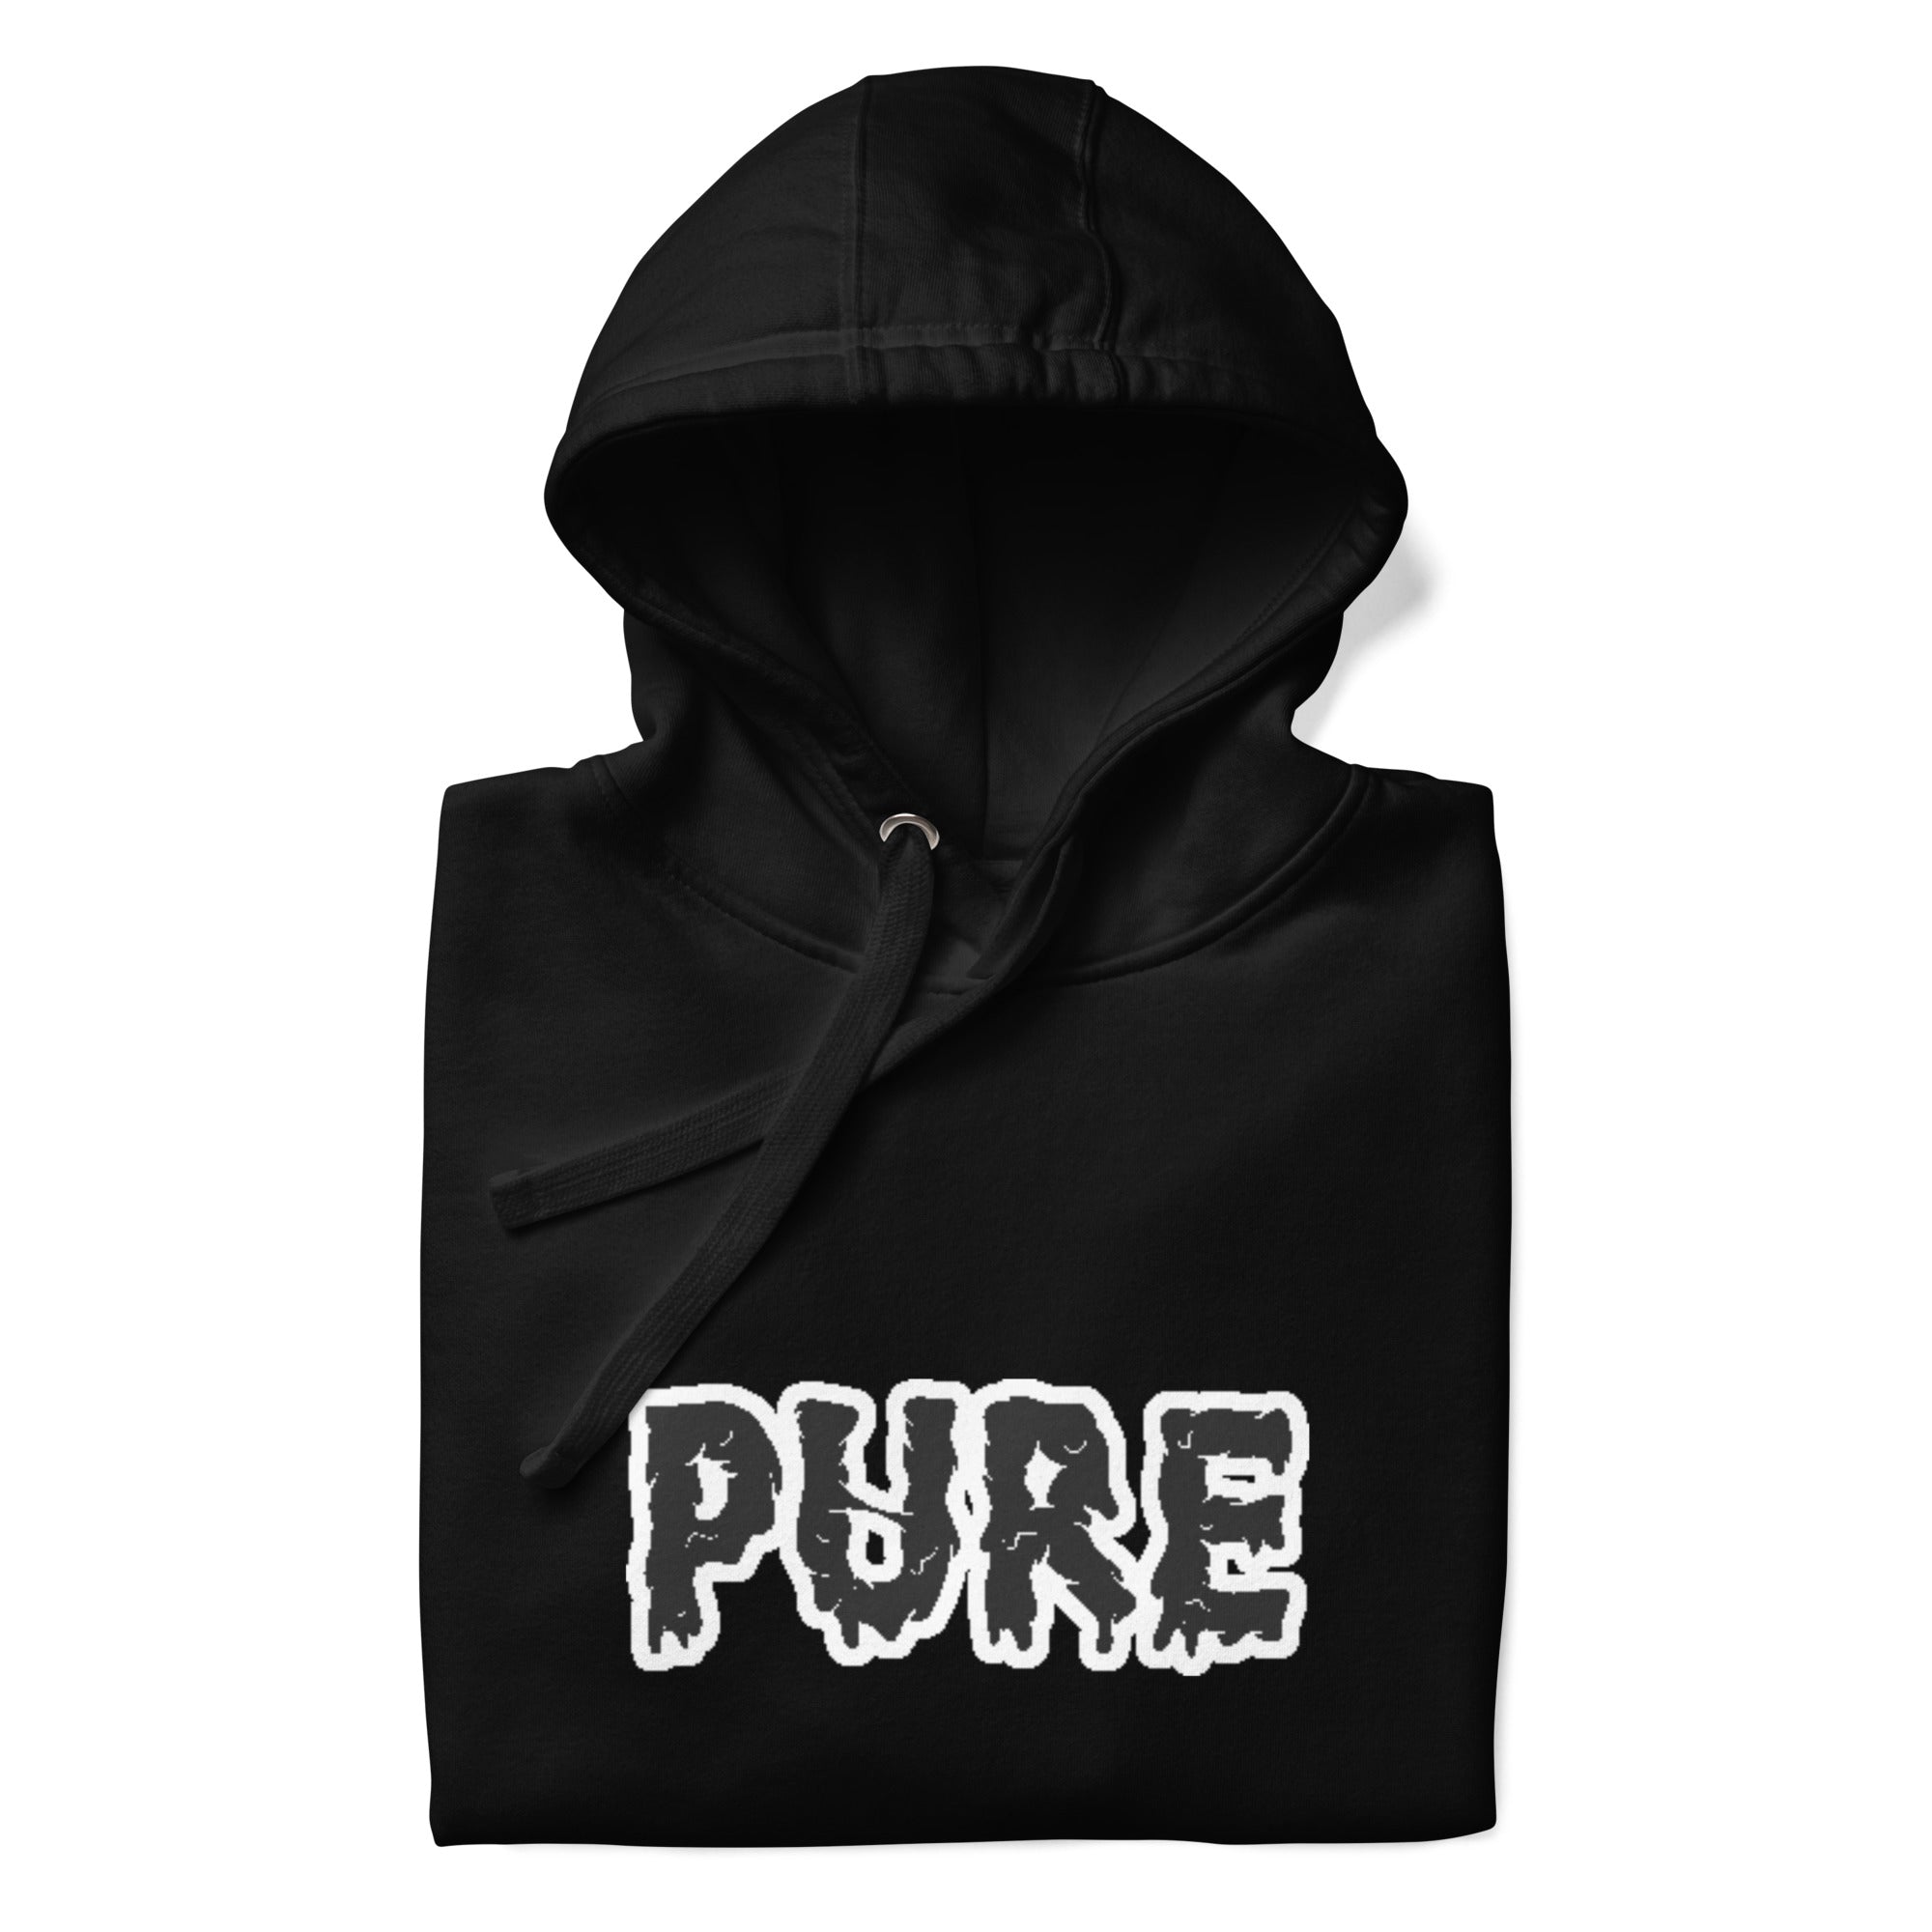 PURE Words Hoodie black and white.